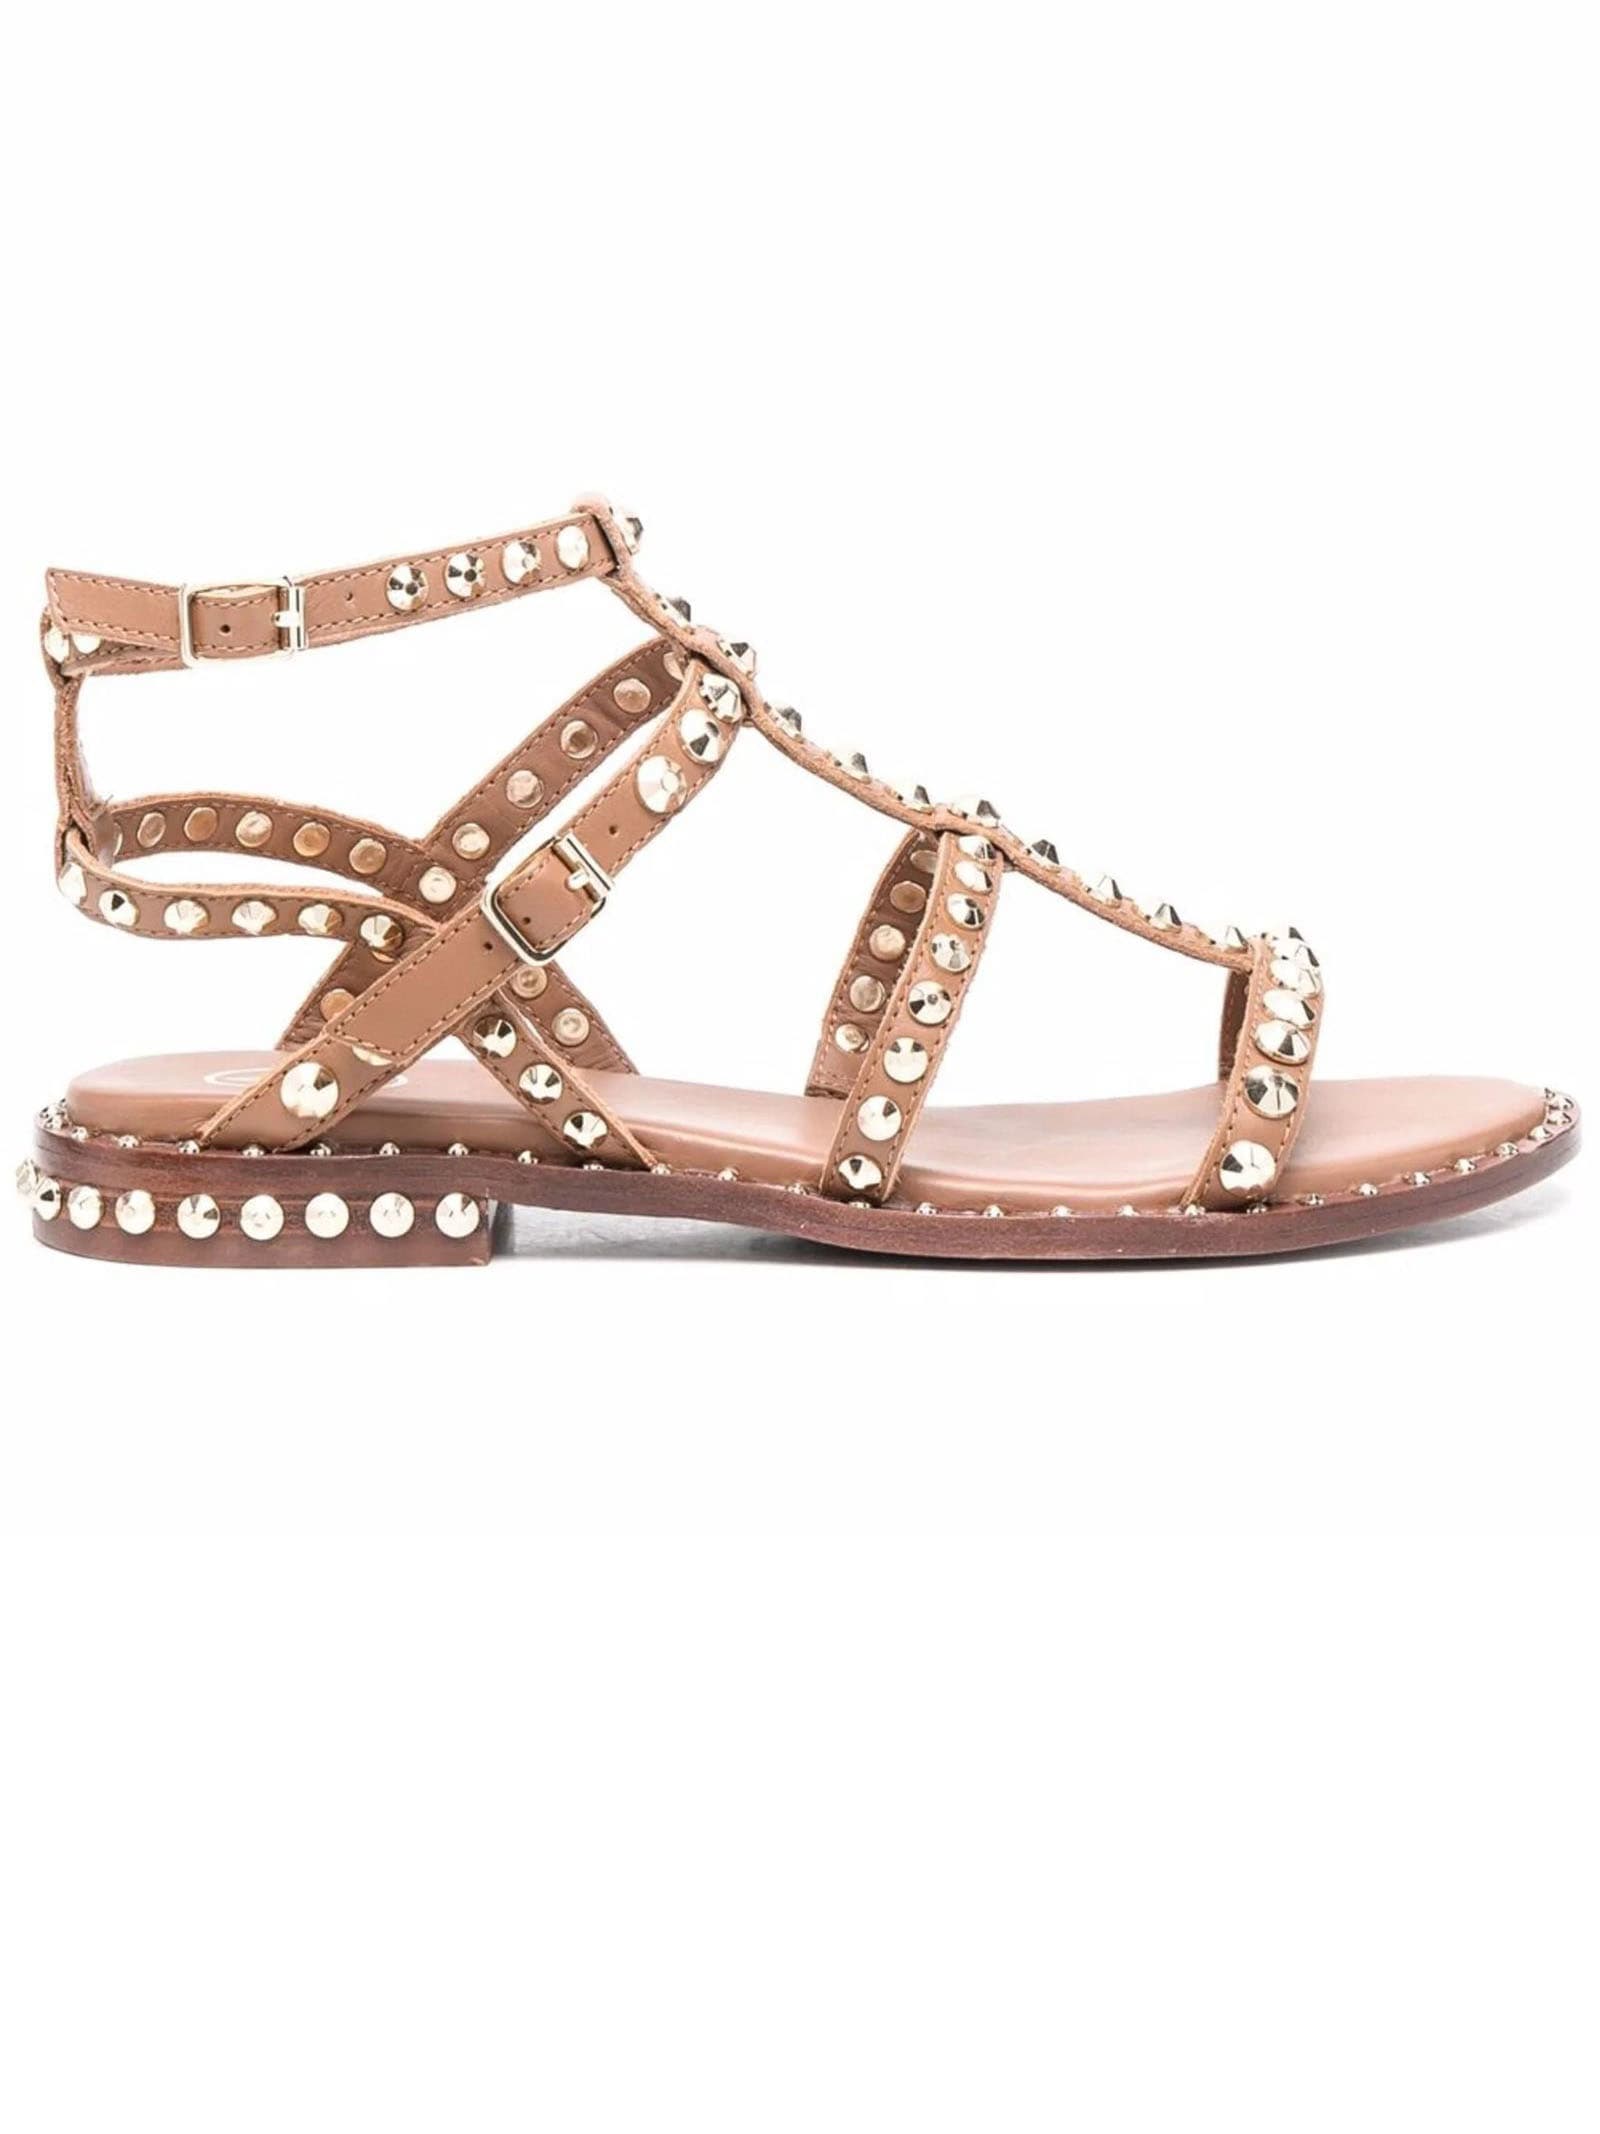 Brown Leather Precious Sandals